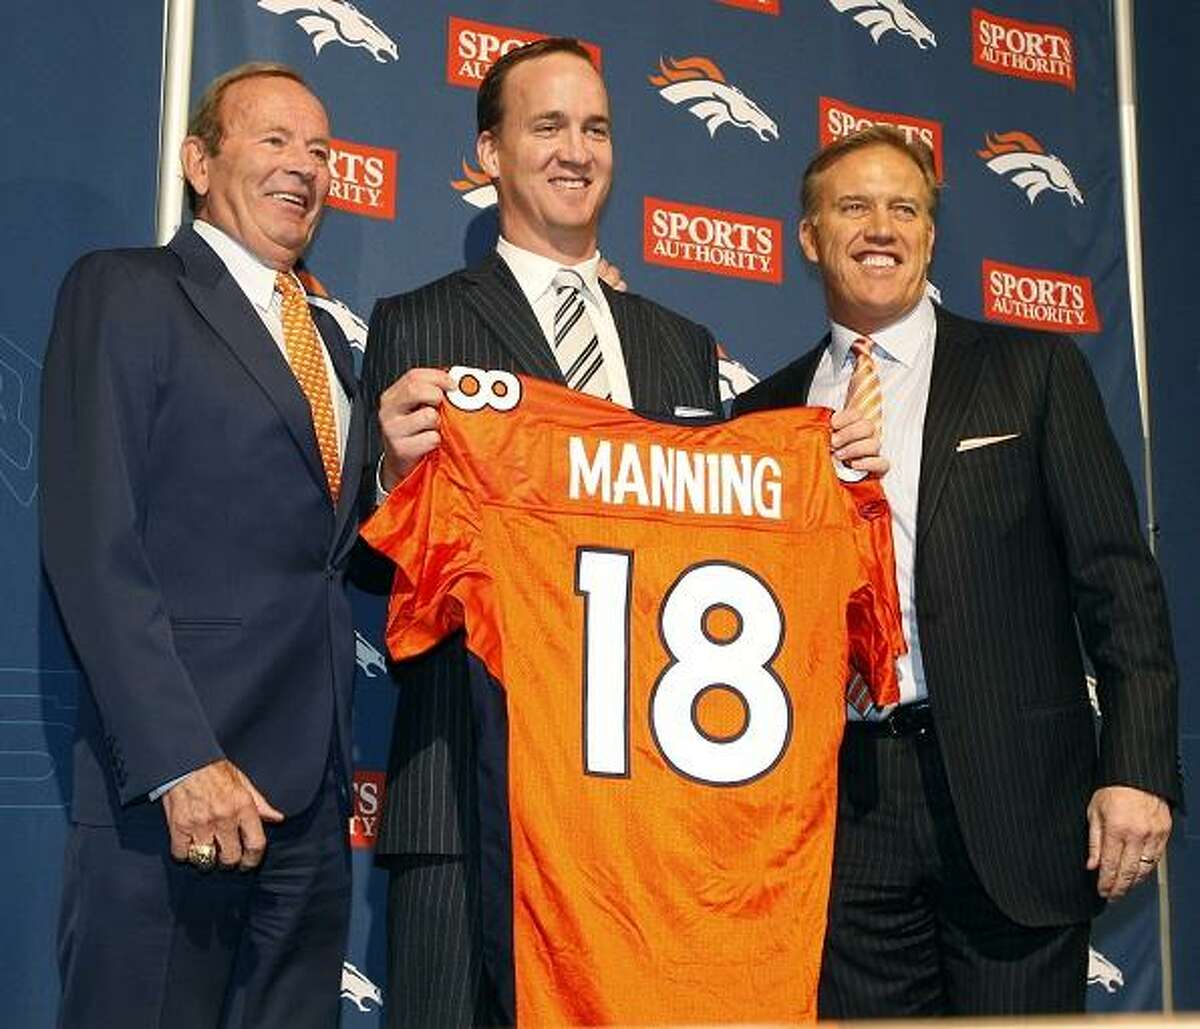 Peyton Manning officially introduced as new Broncos quarterback